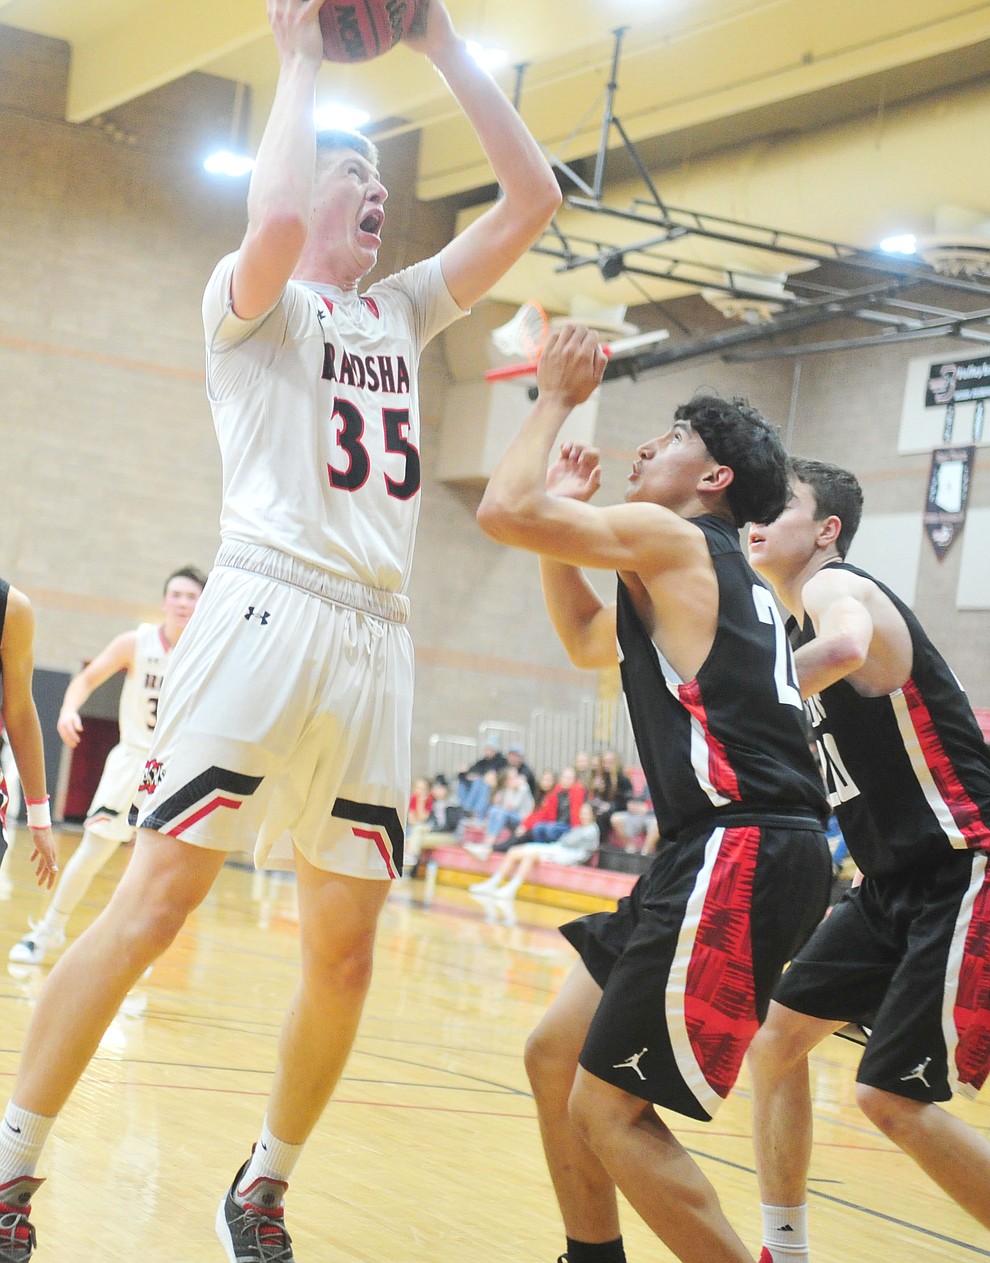 Bradshaw Mountain's Nate Summit goes up as the Bears hosted Coconino in a doubleheader hoops matchup Saturday, Dec. 15, 2018 in Prescott Valley. (Les Stukenberg/Courier).